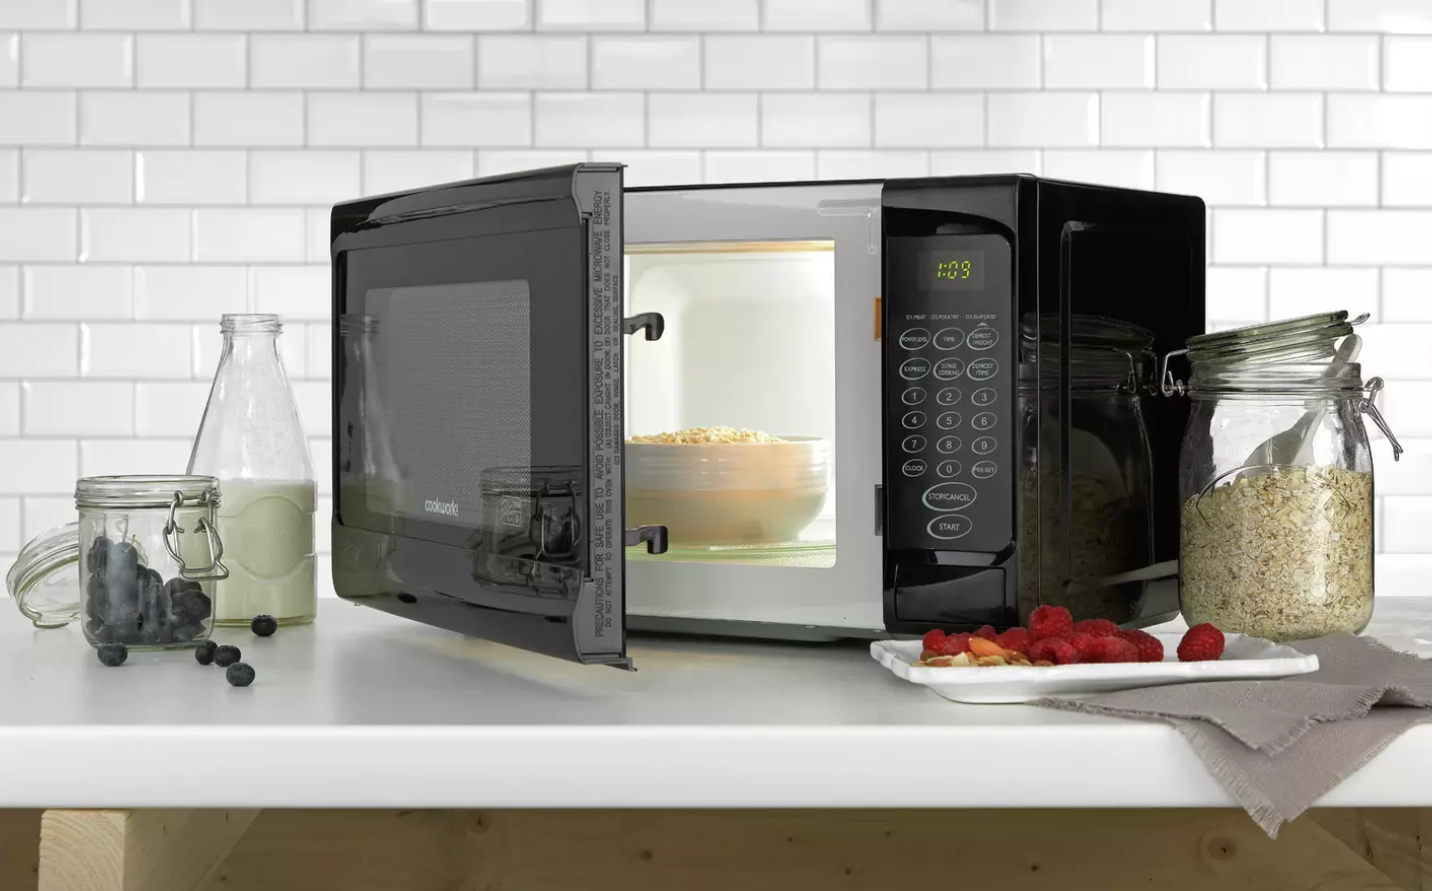 Microwave Maintenance: Caring & Cleaning